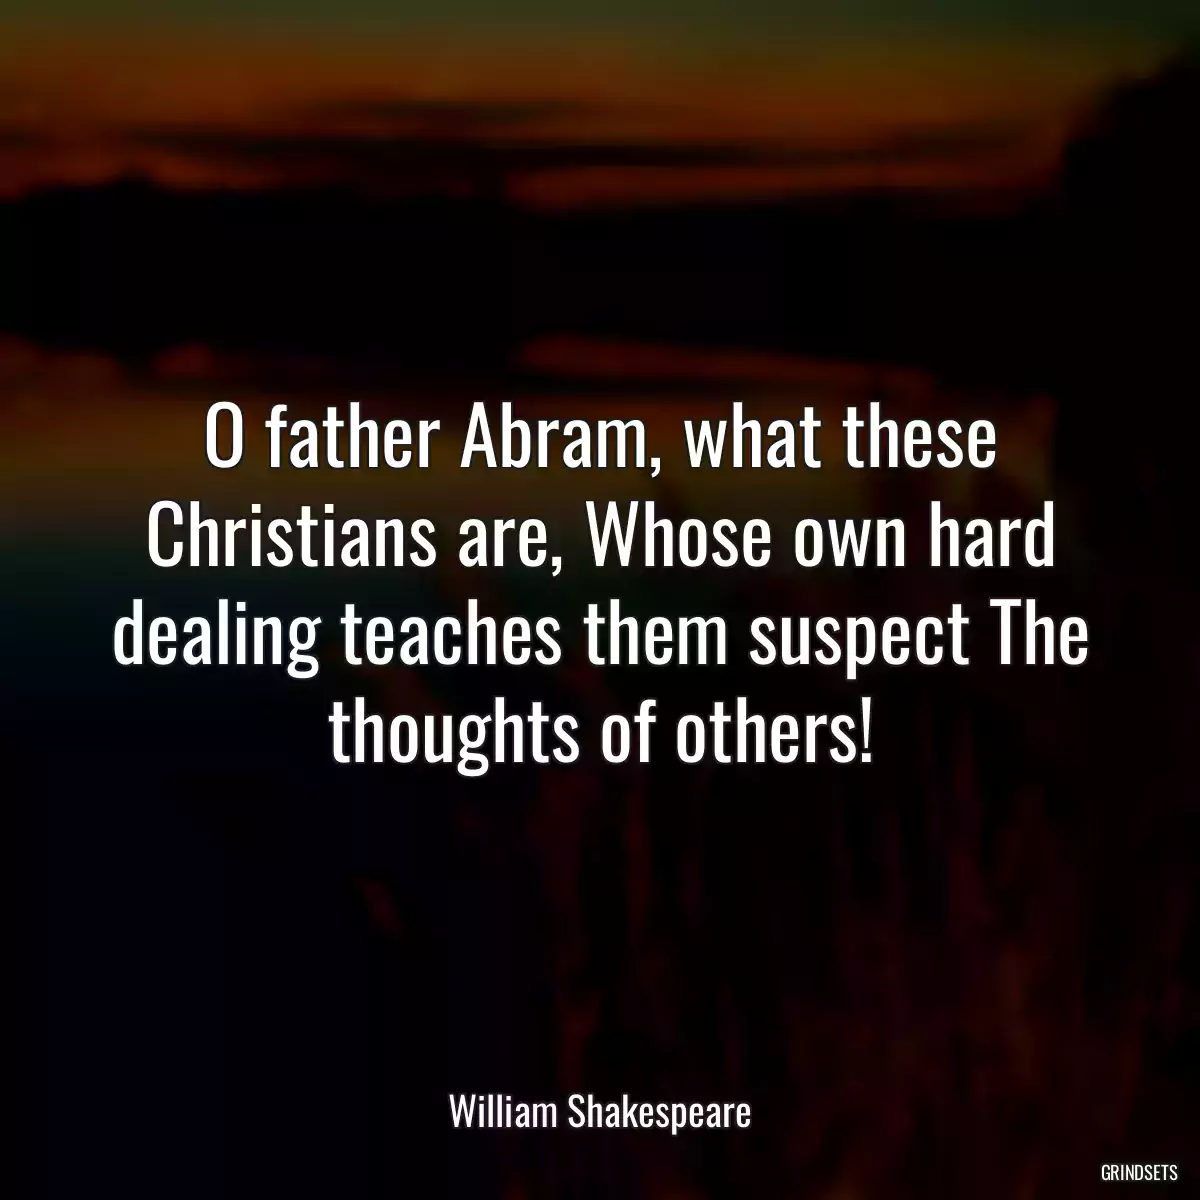 O father Abram, what these Christians are, Whose own hard dealing teaches them suspect The thoughts of others!